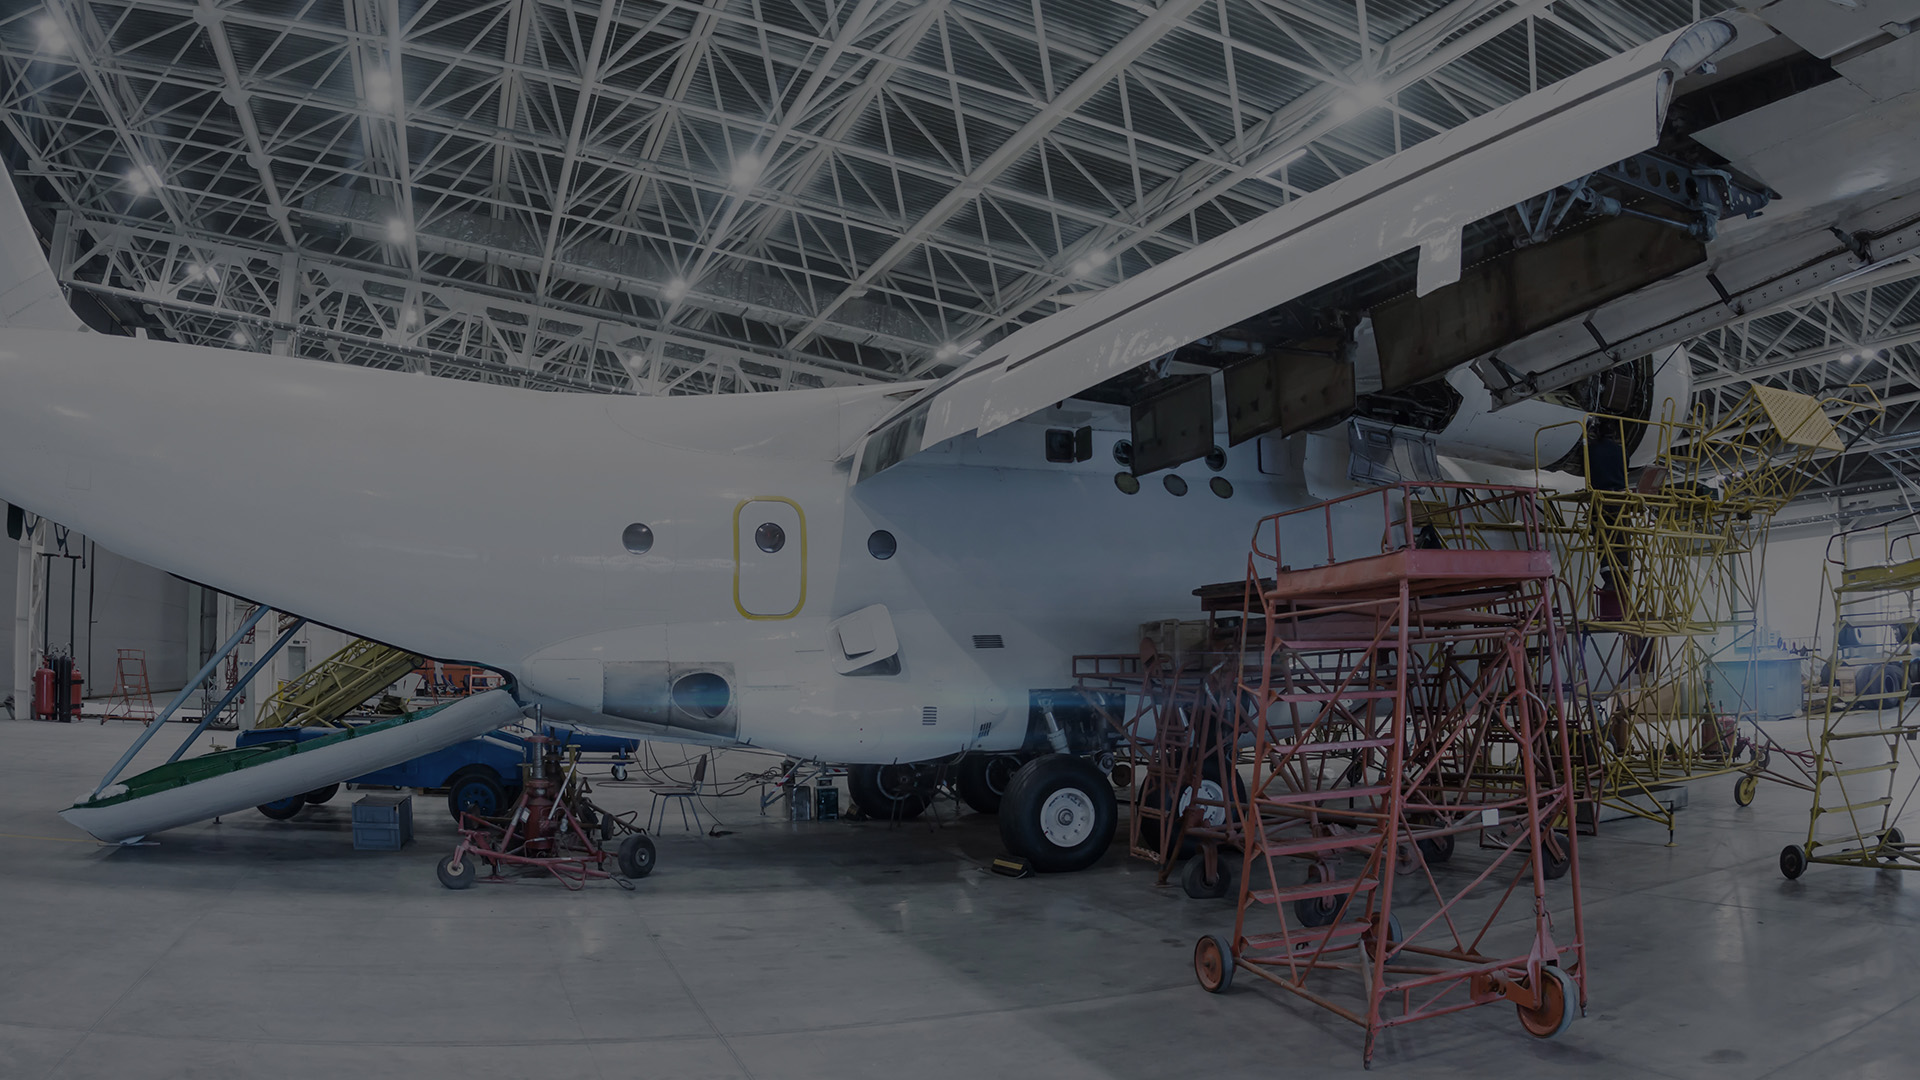 Applications and advantages of 3D printing in the aerospace industry